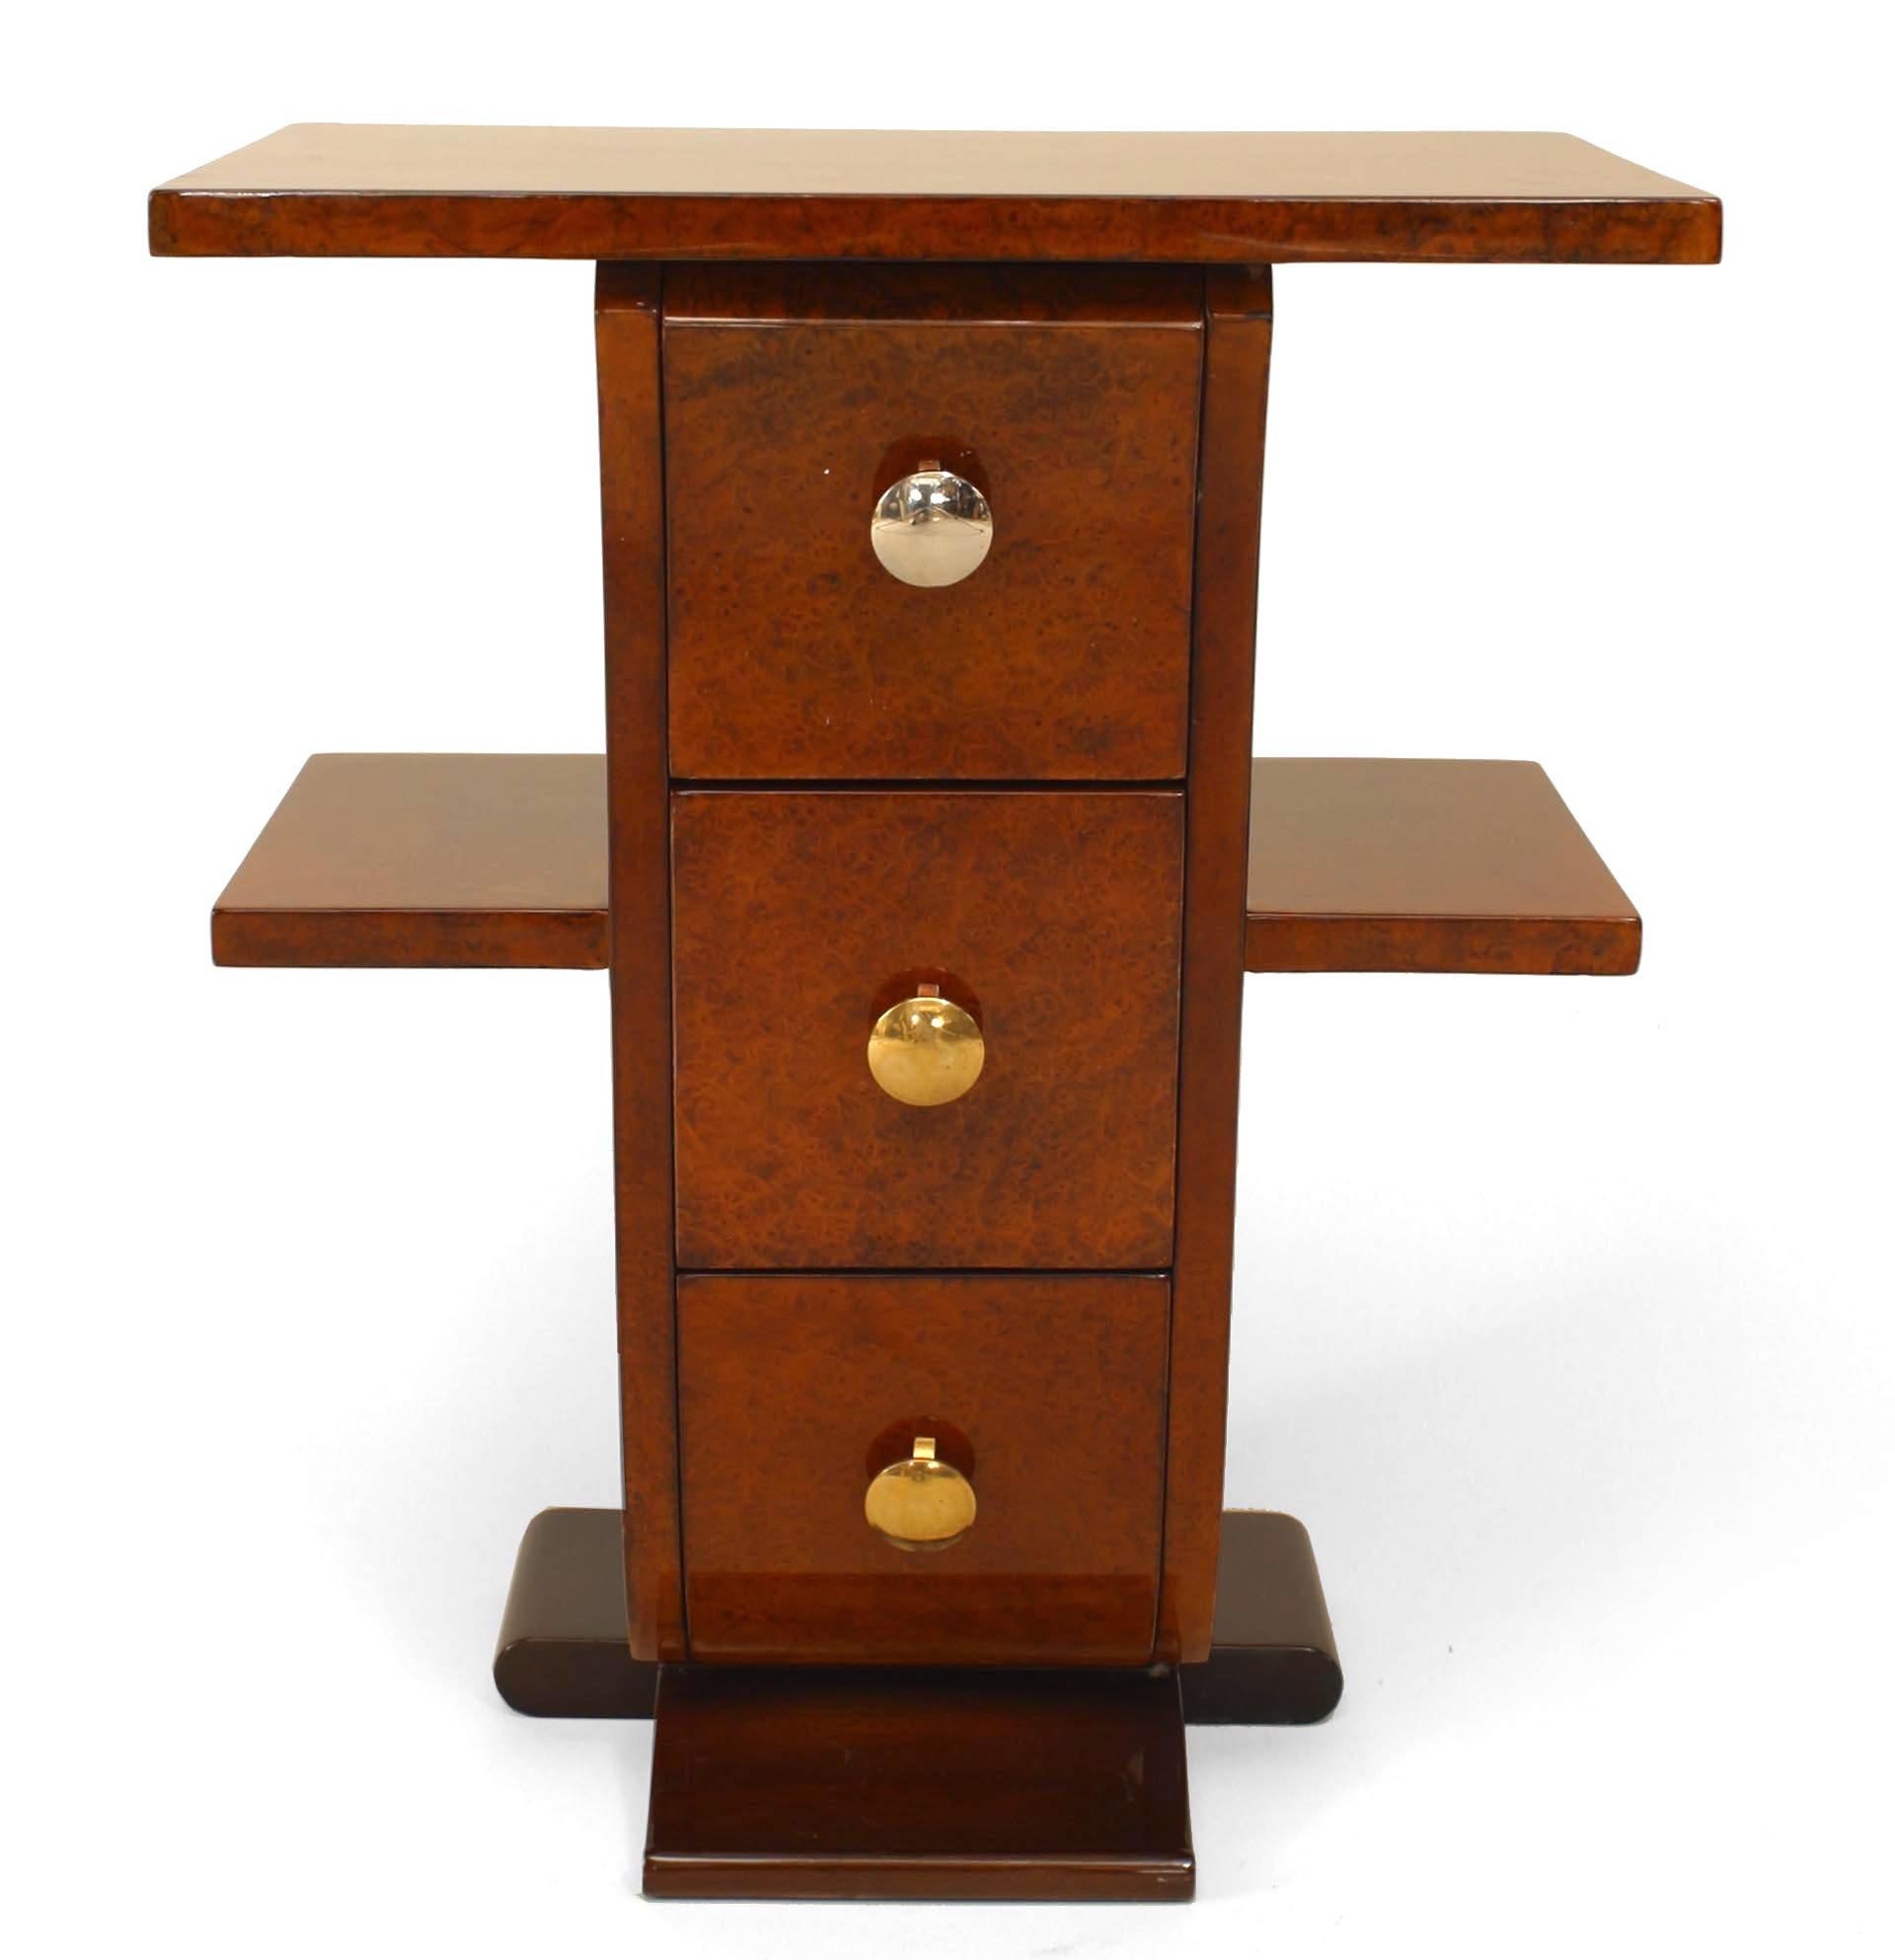 Pair of French Art Deco amboyna wood end tables with 3 drawers having chrome and brass drawer pulls and flanked by a Pair of shelves and resting on a mahogany base. (PRICED AS Pair)
